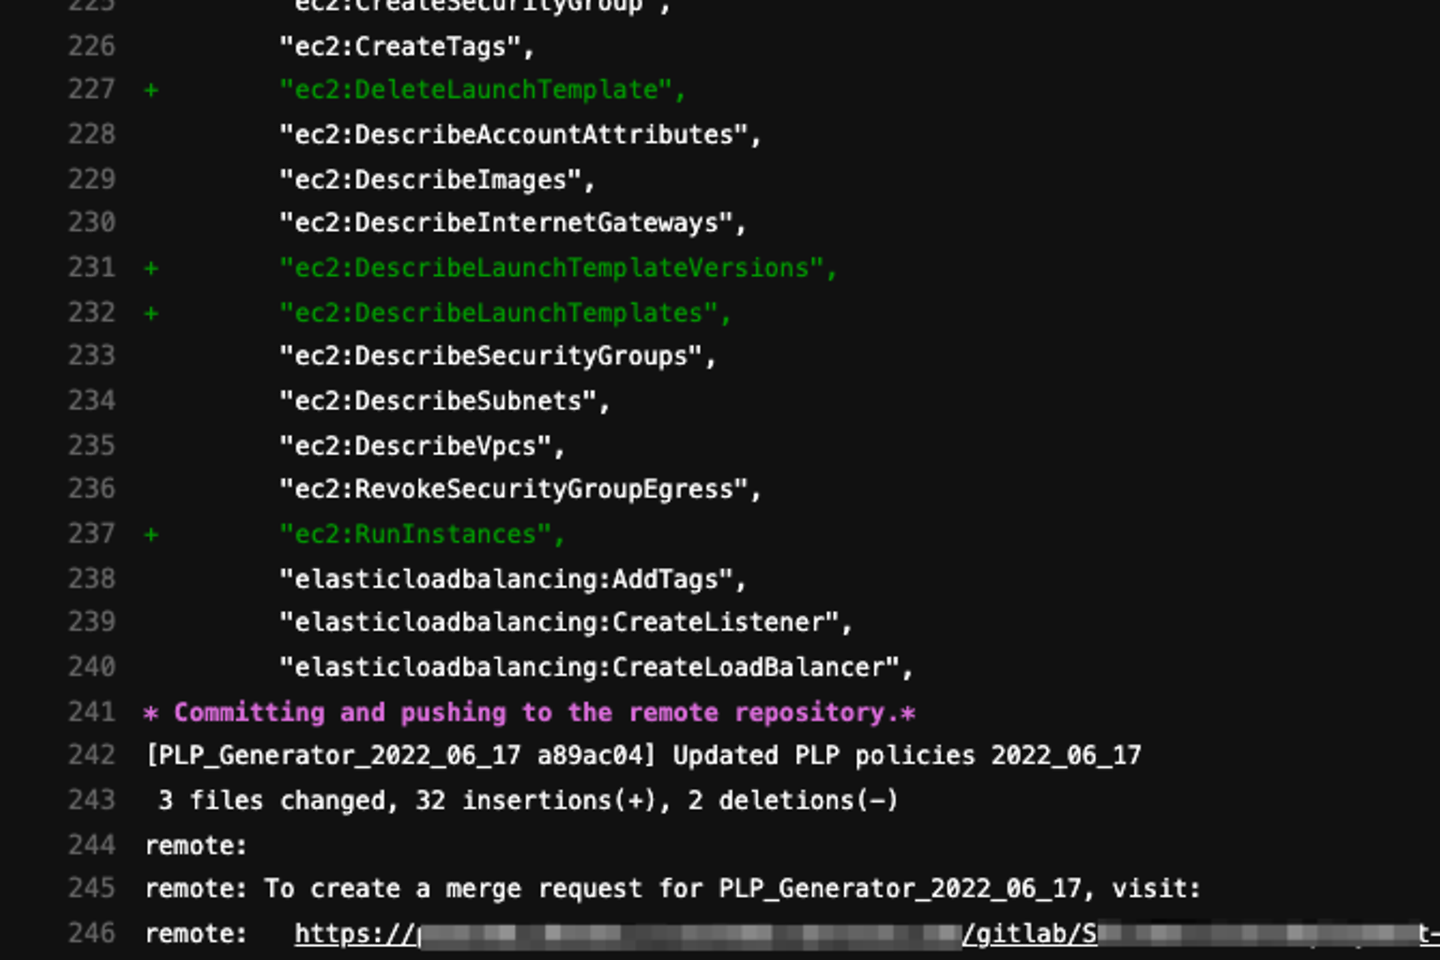 HTML Code for creating a merge request with PLP